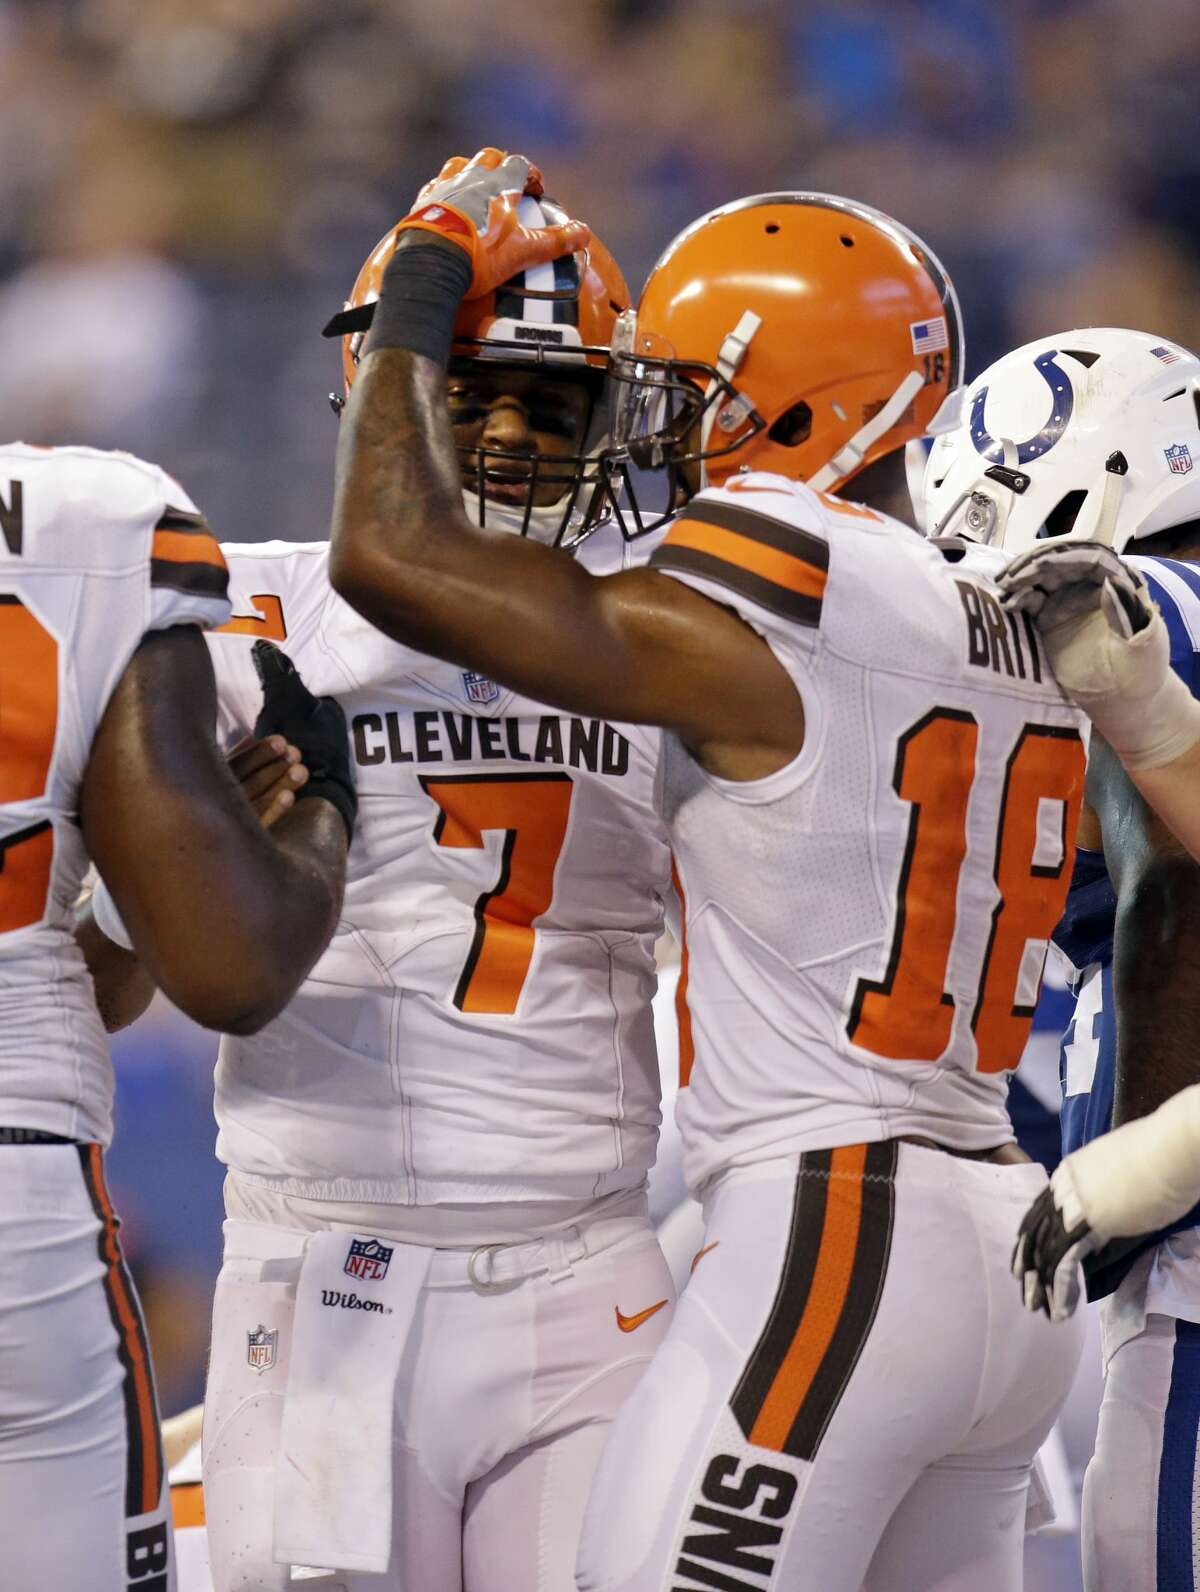 Cleveland Browns Current Super Bowl odds: 1000/1 Prior to the season: 300/1